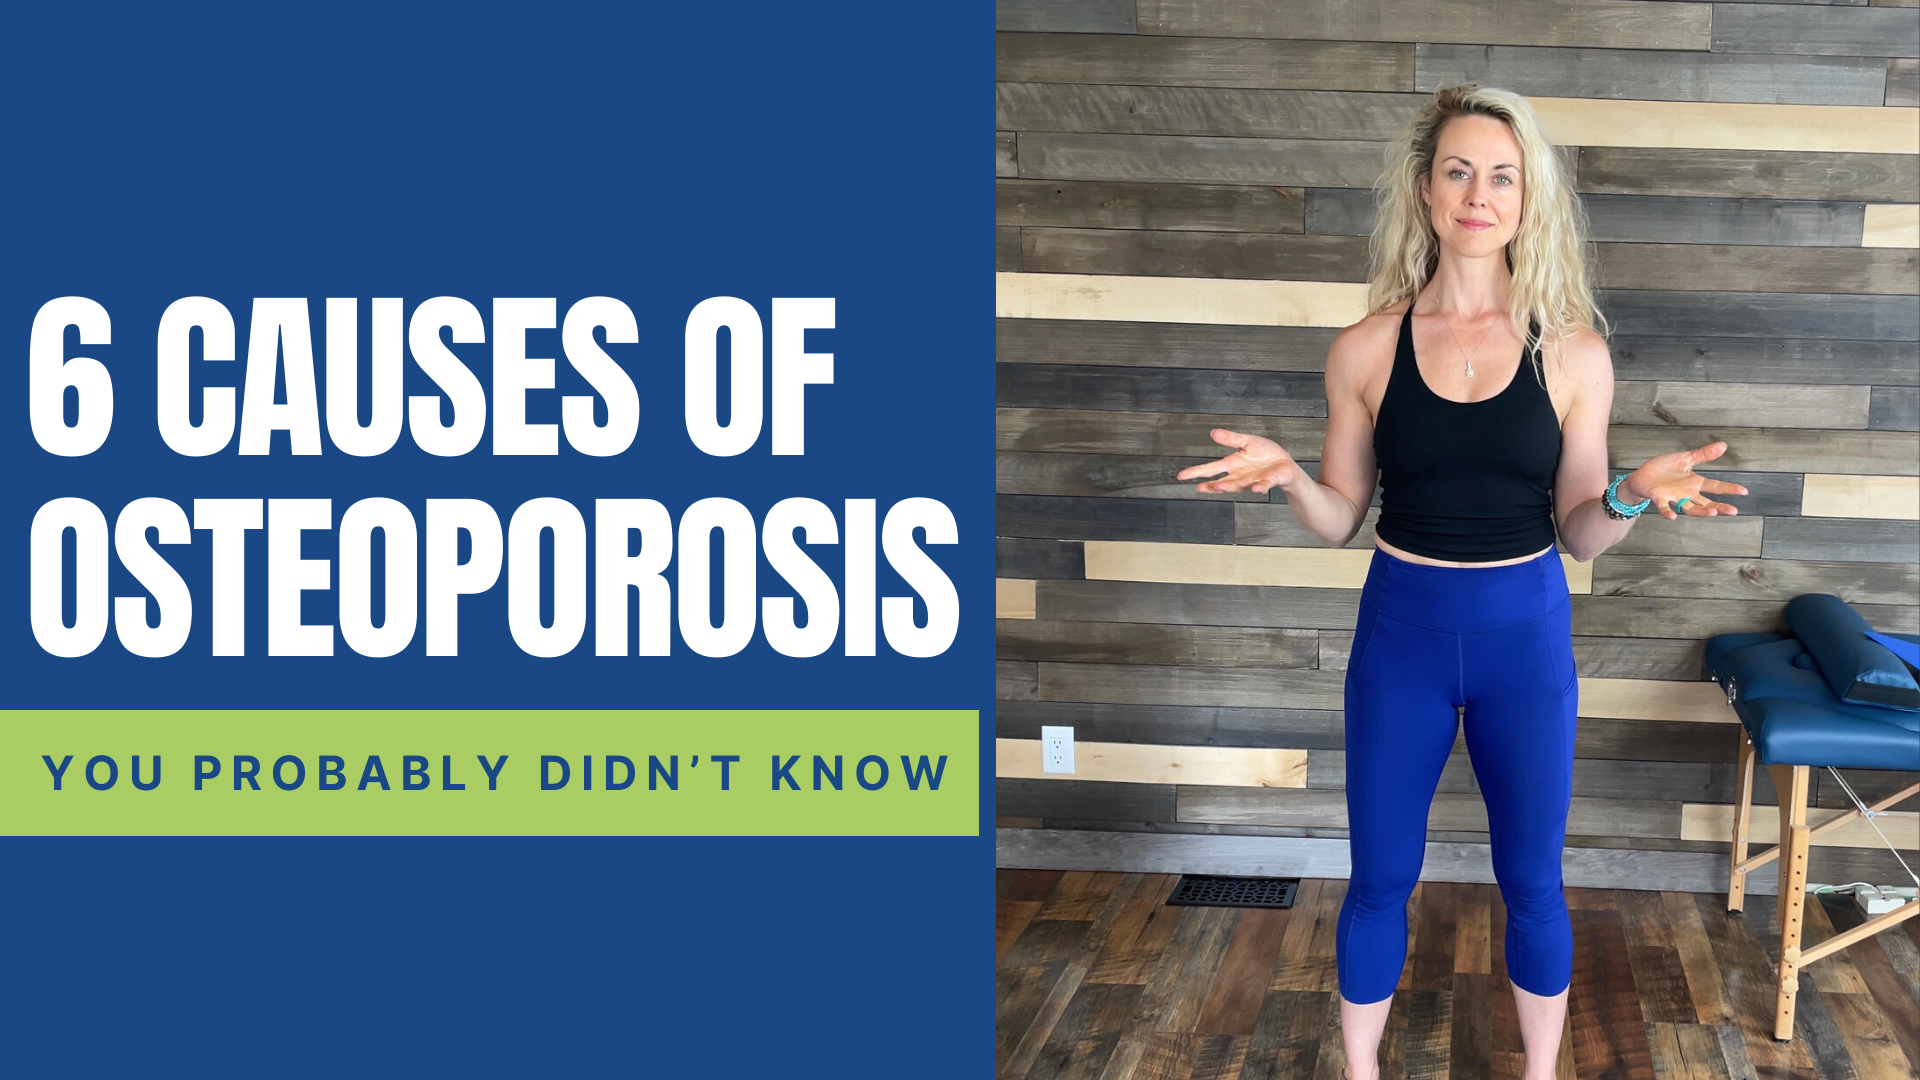 6 causes of osteoporosis you probably didn’t know